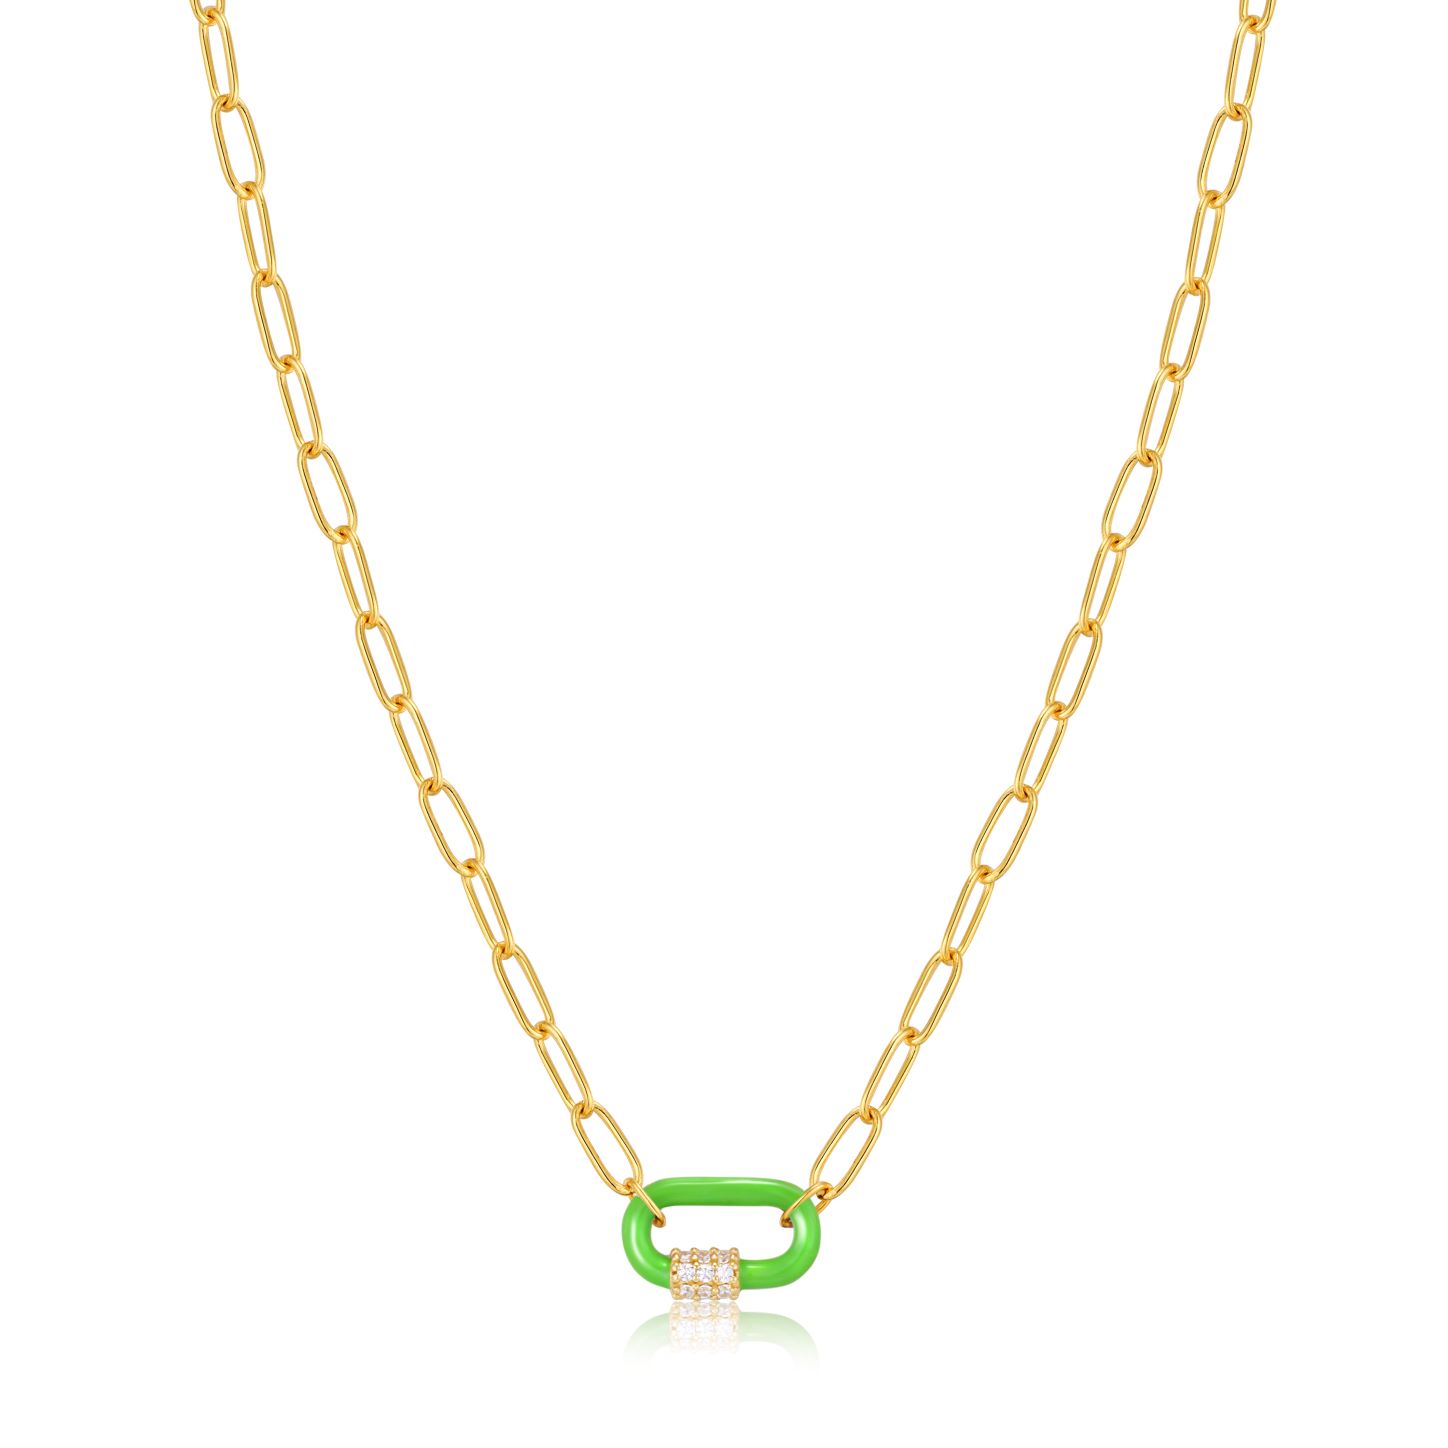 ANIA HAIE Neon Green Enamel Carabiner Gold Necklace